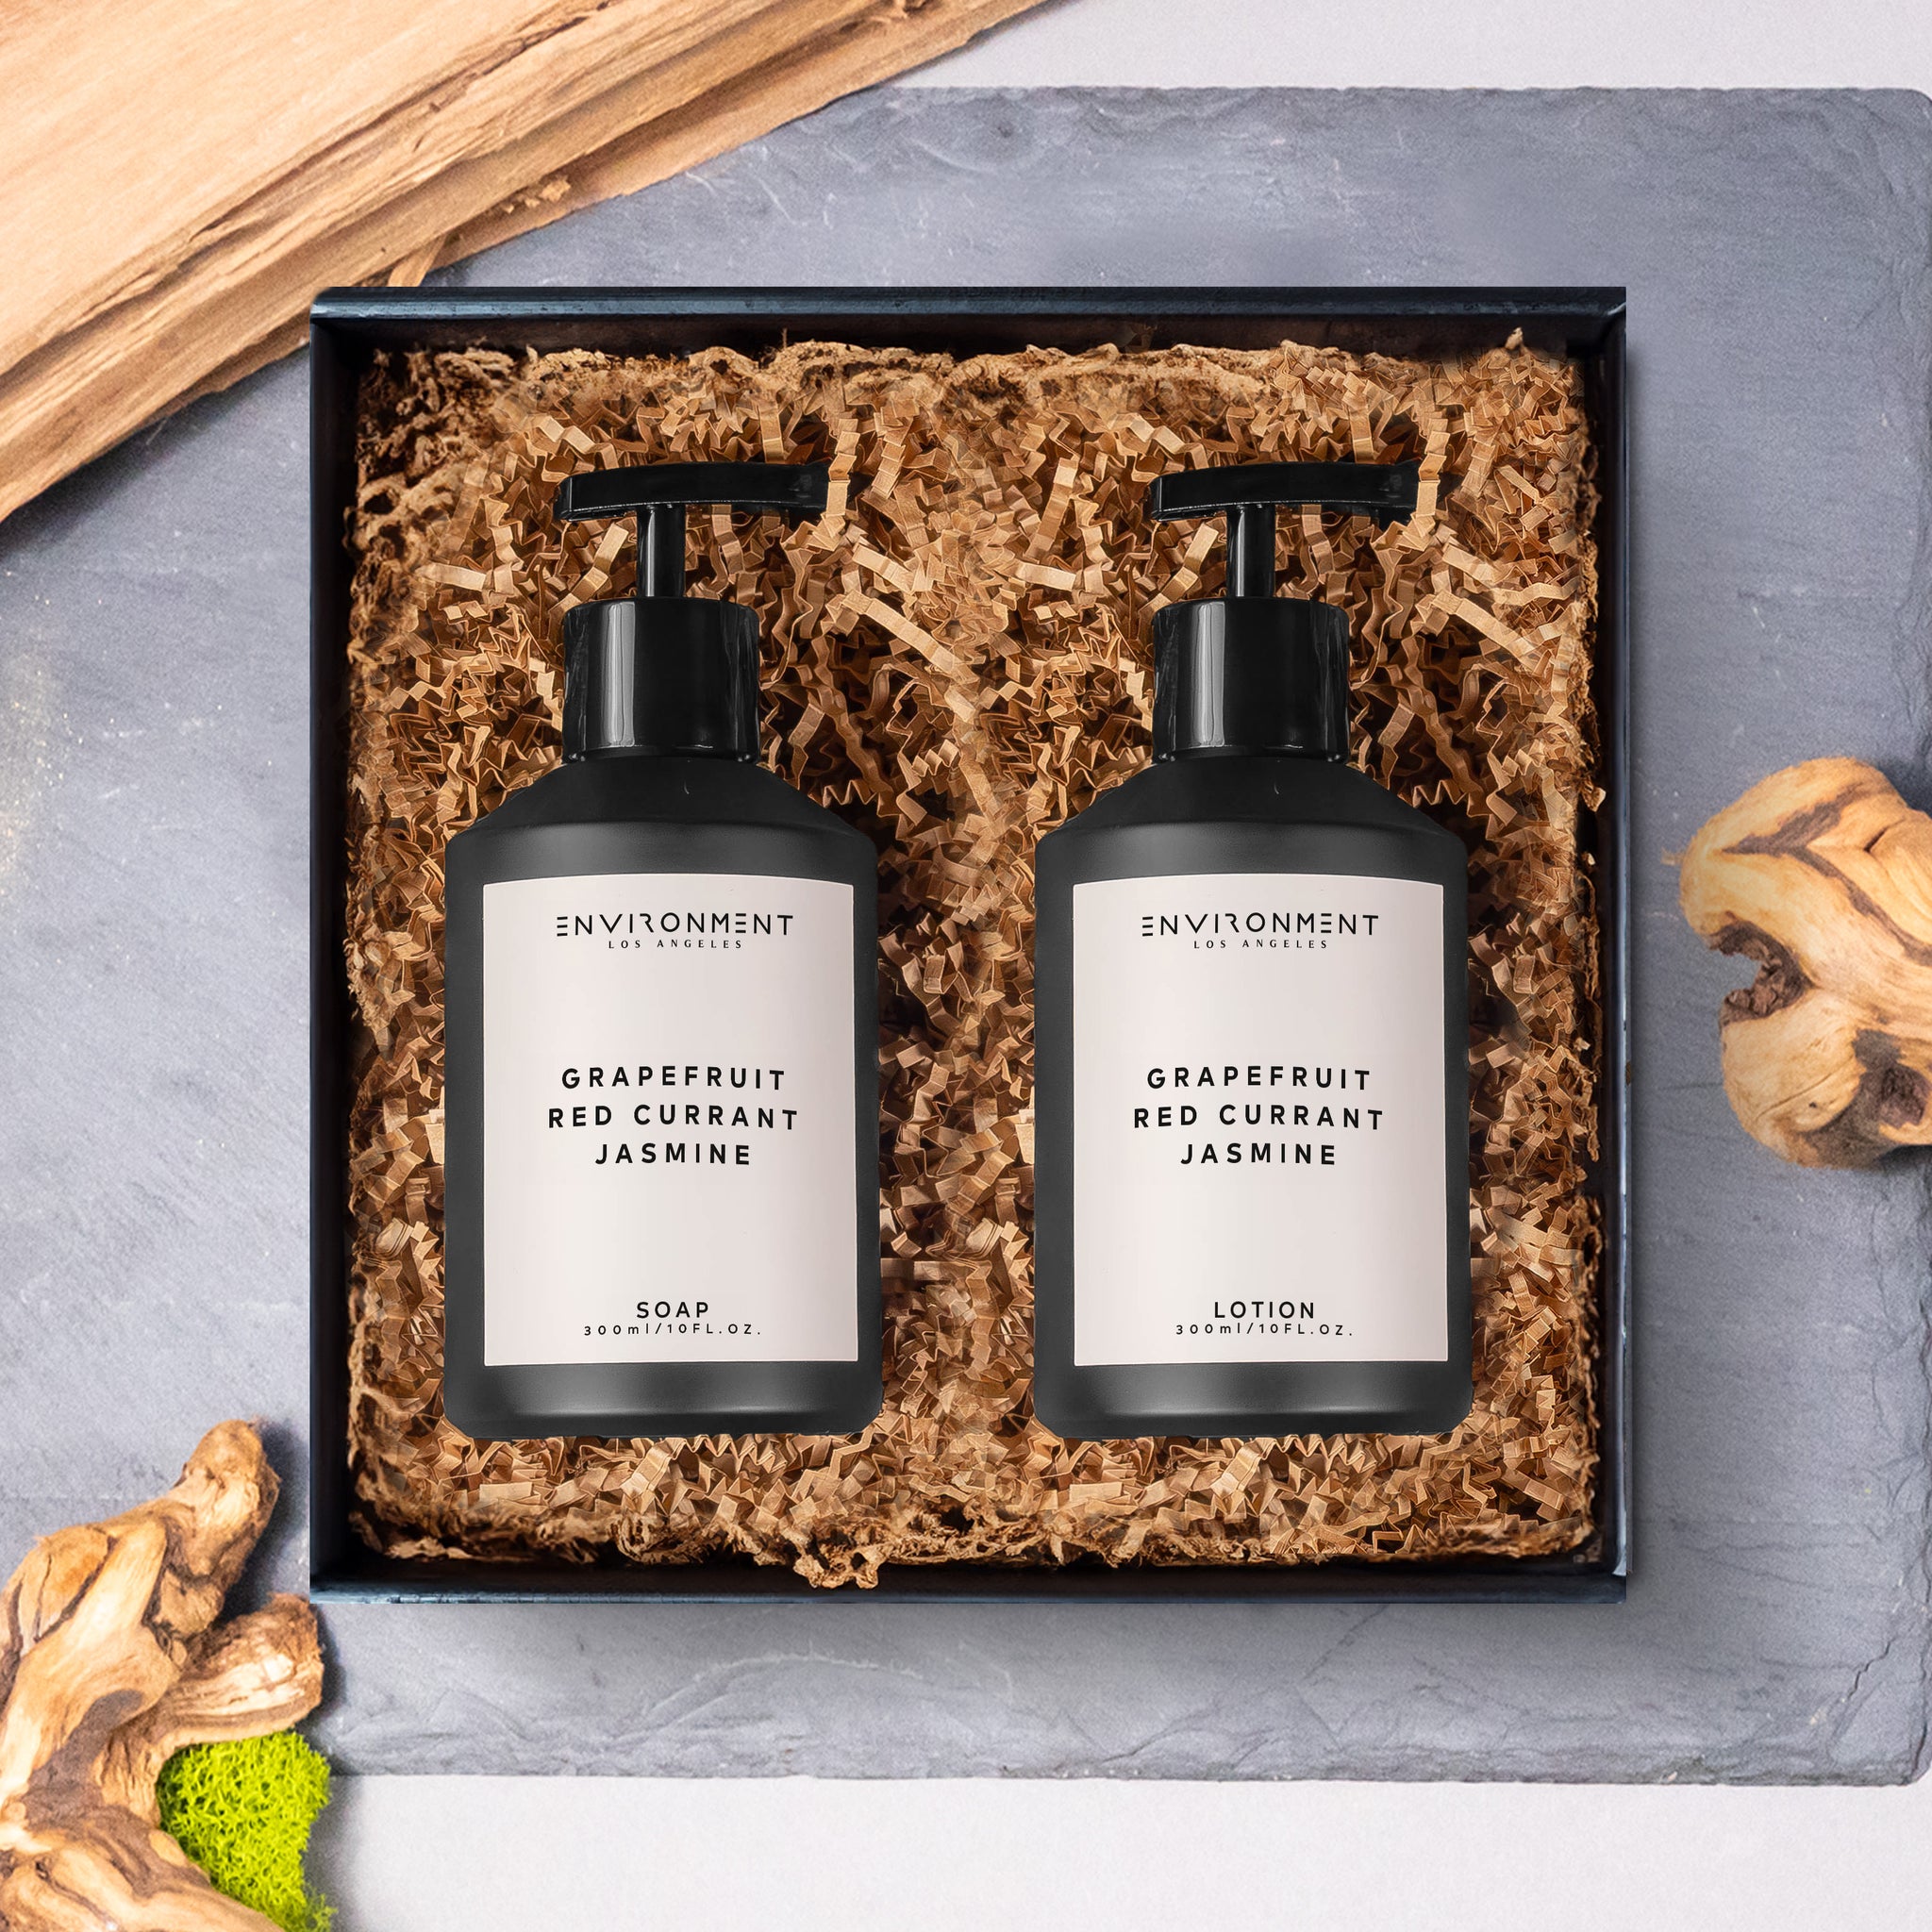 Grapefruit | Red Currant | Jasmine 300ml Hand Soap and 300ml Lotion Gift Pack (Inspired by Marriott Hotel®)